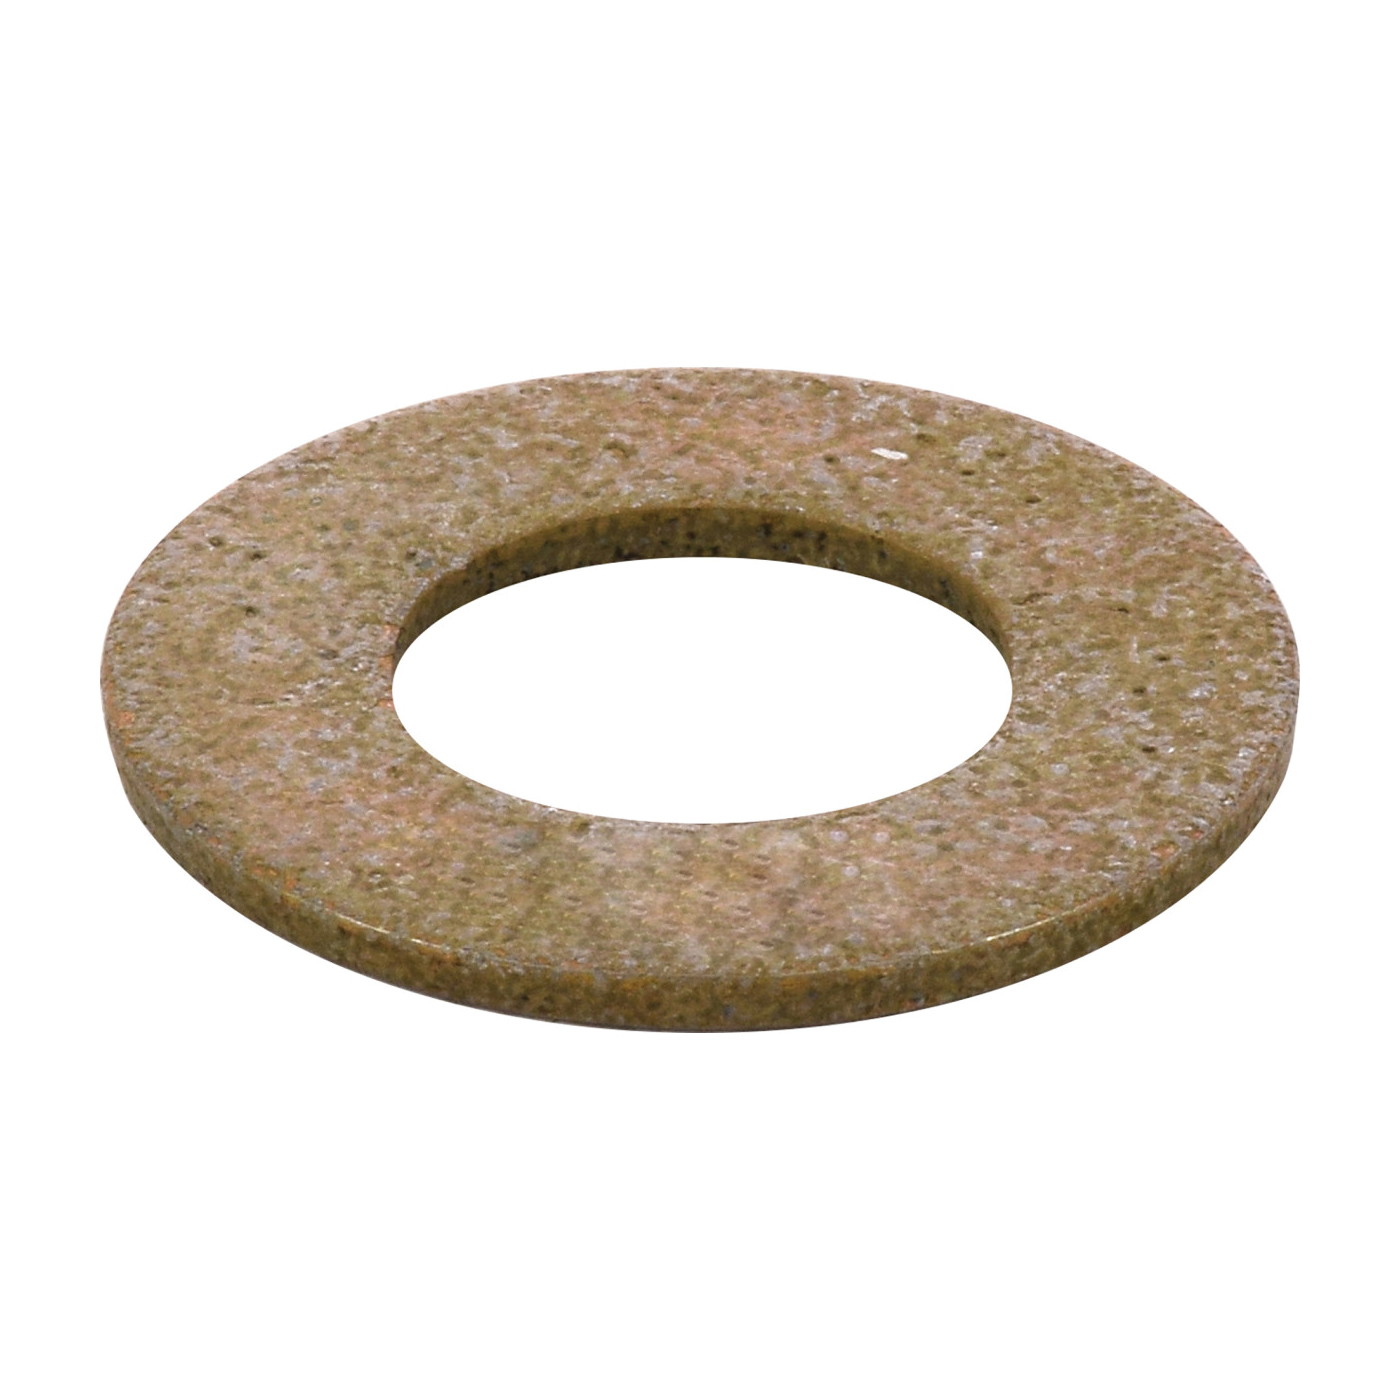 880258 Washer, 1/2 in ID, 8 Grade